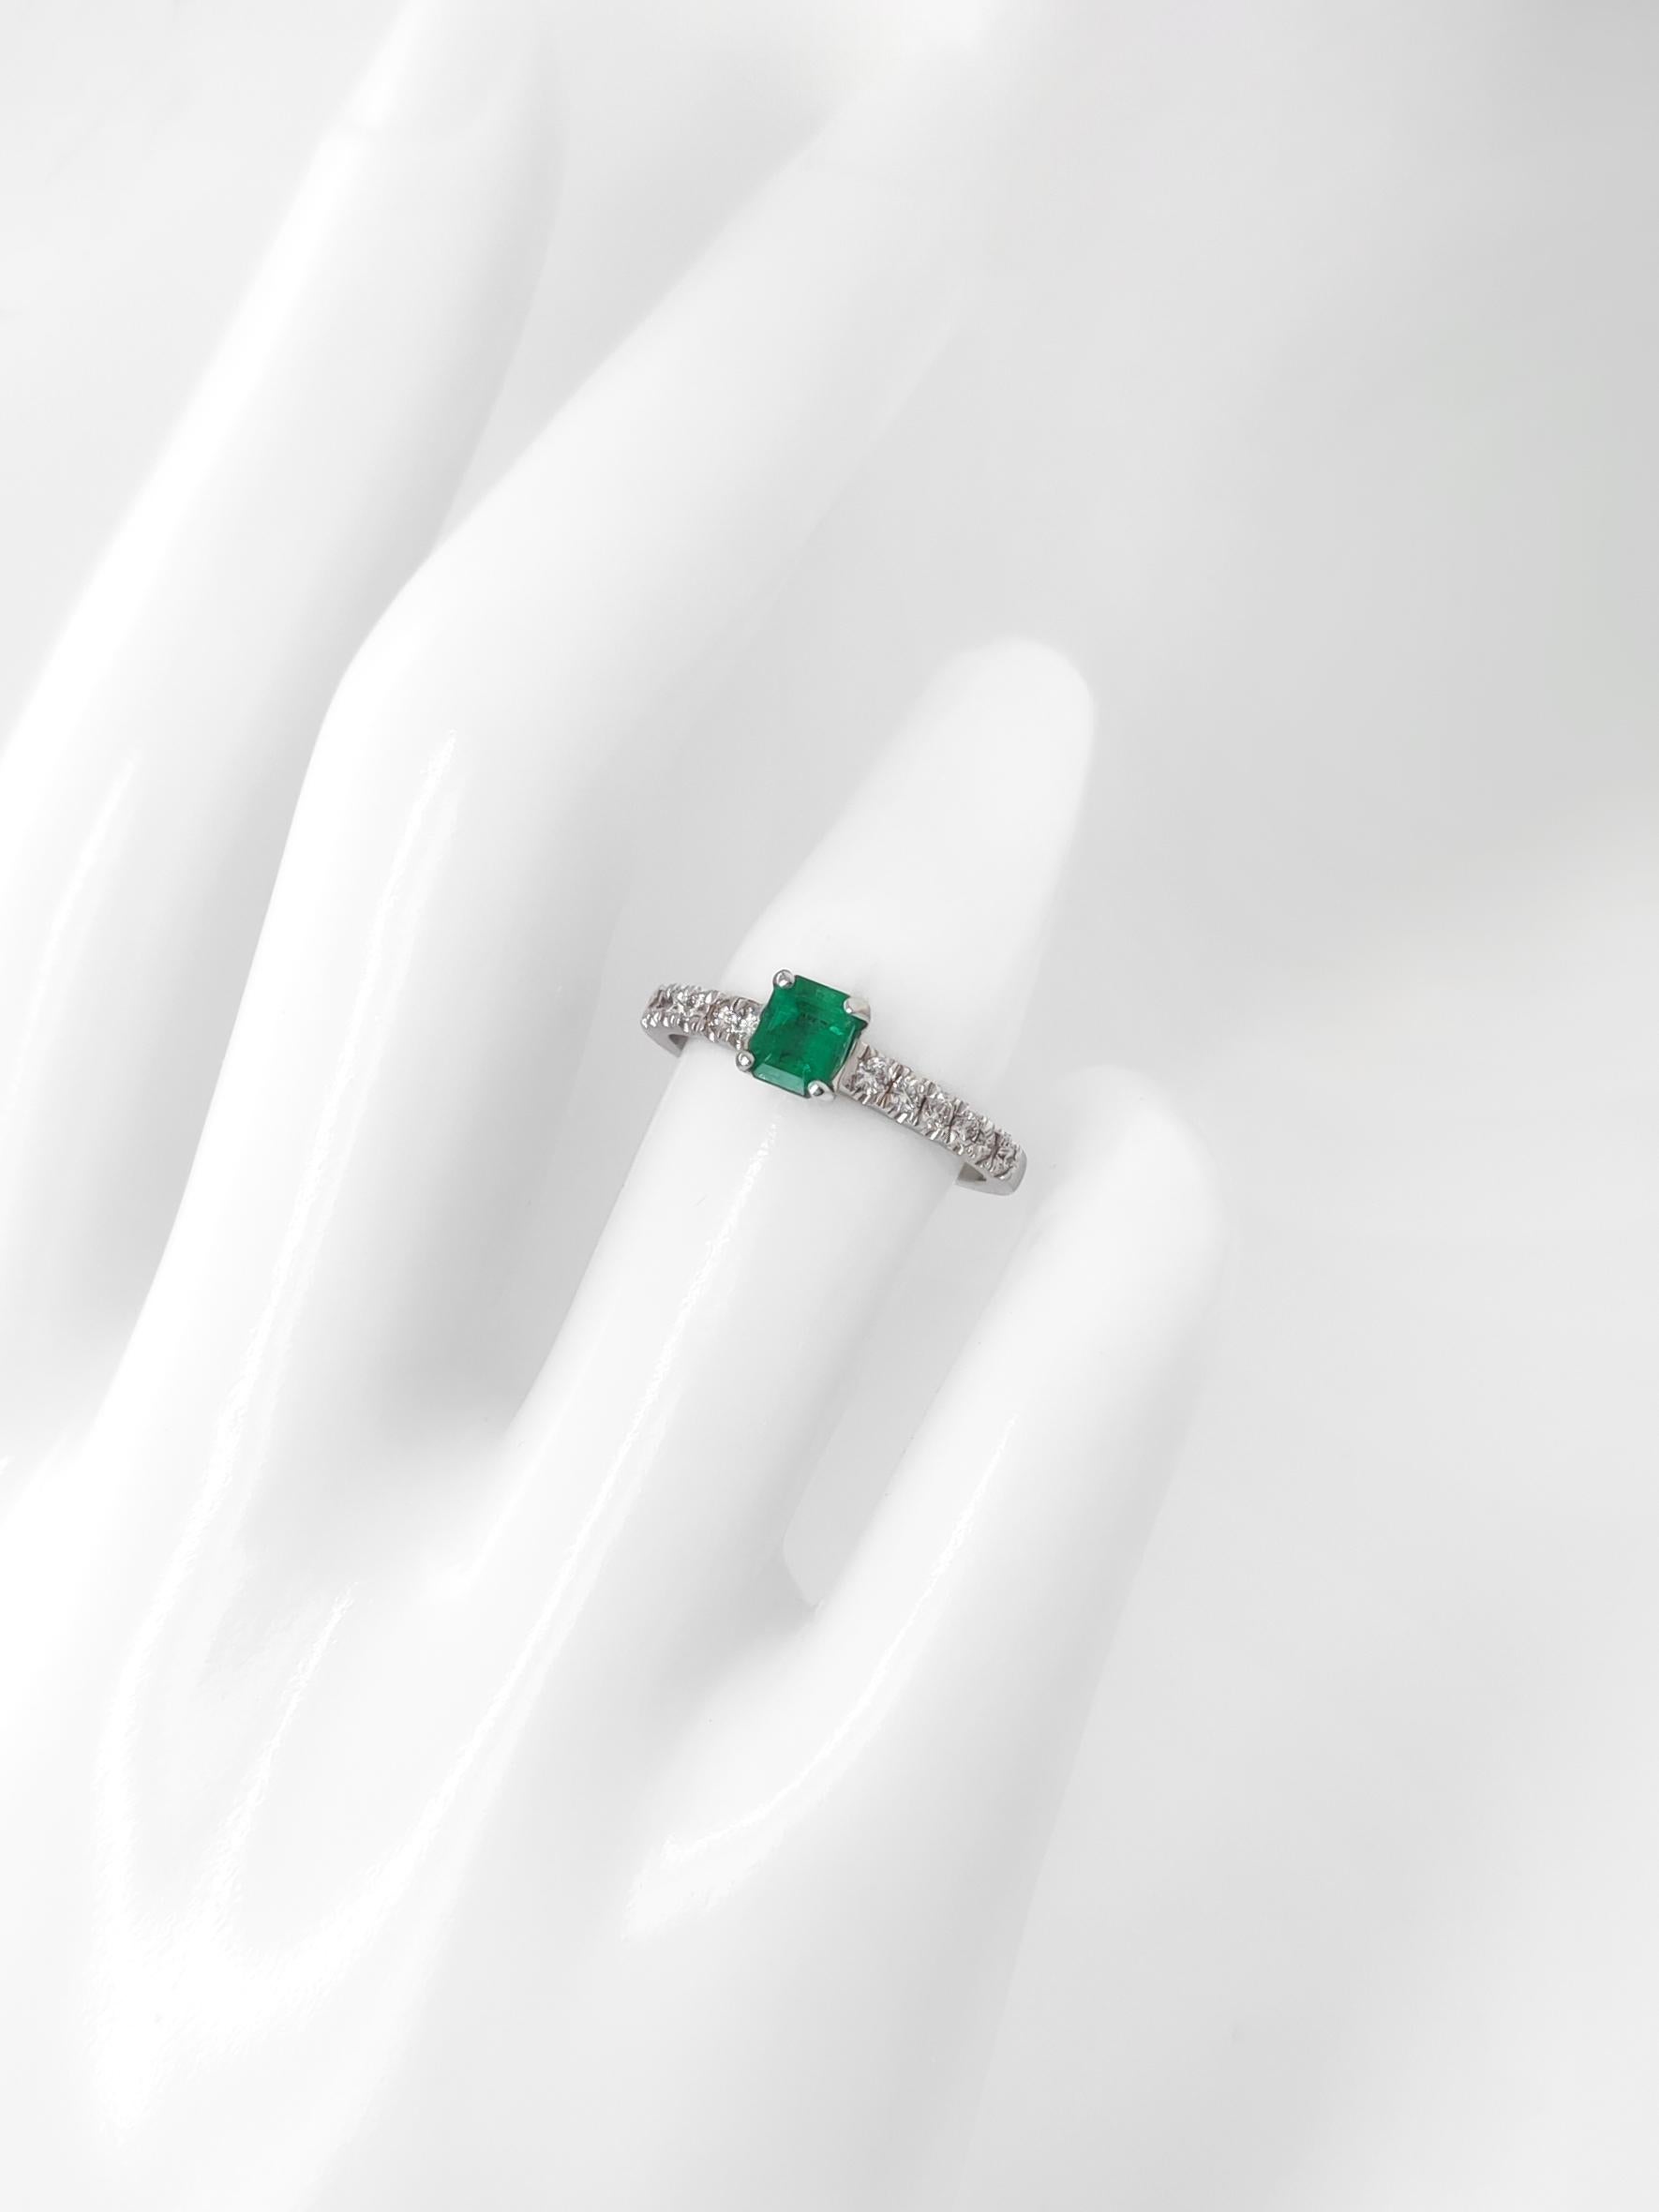 FOR US BUYER NO VAT

This charming ring features a 0.43 carat green emerald as its focal point, displaying the enchanting green hue that emeralds are known for.

Enhancing the emerald's beauty are 12 diamonds, totaling 0.43 carats. These diamonds